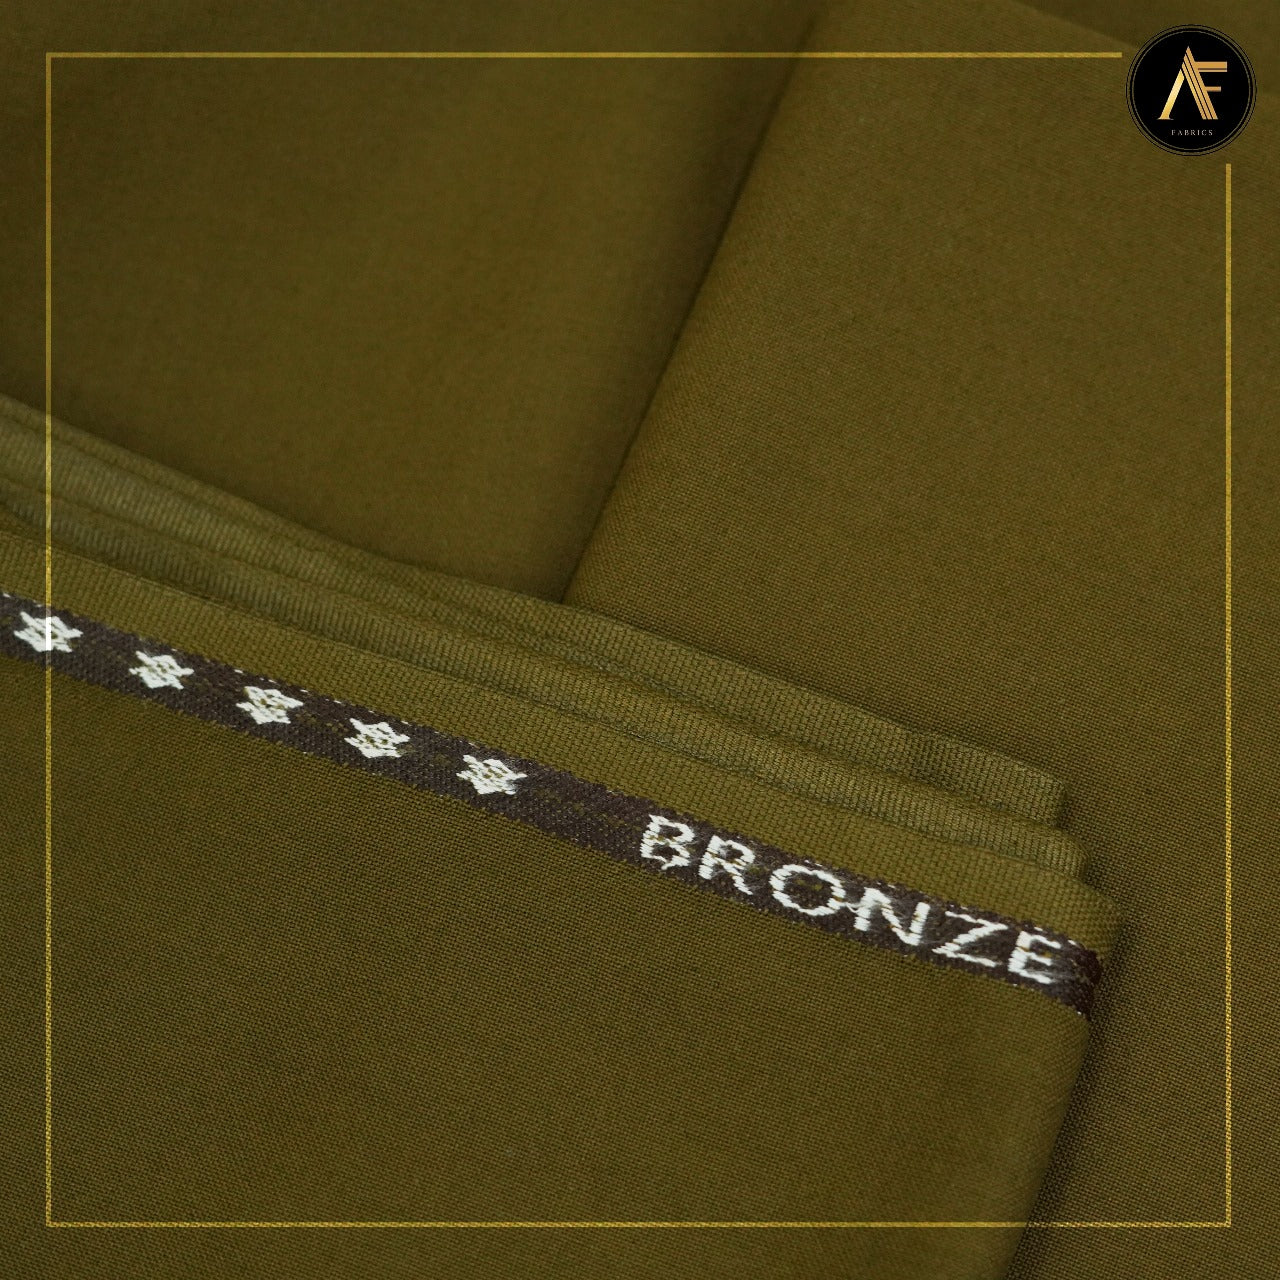 Bronze The Best Choice Of Winters